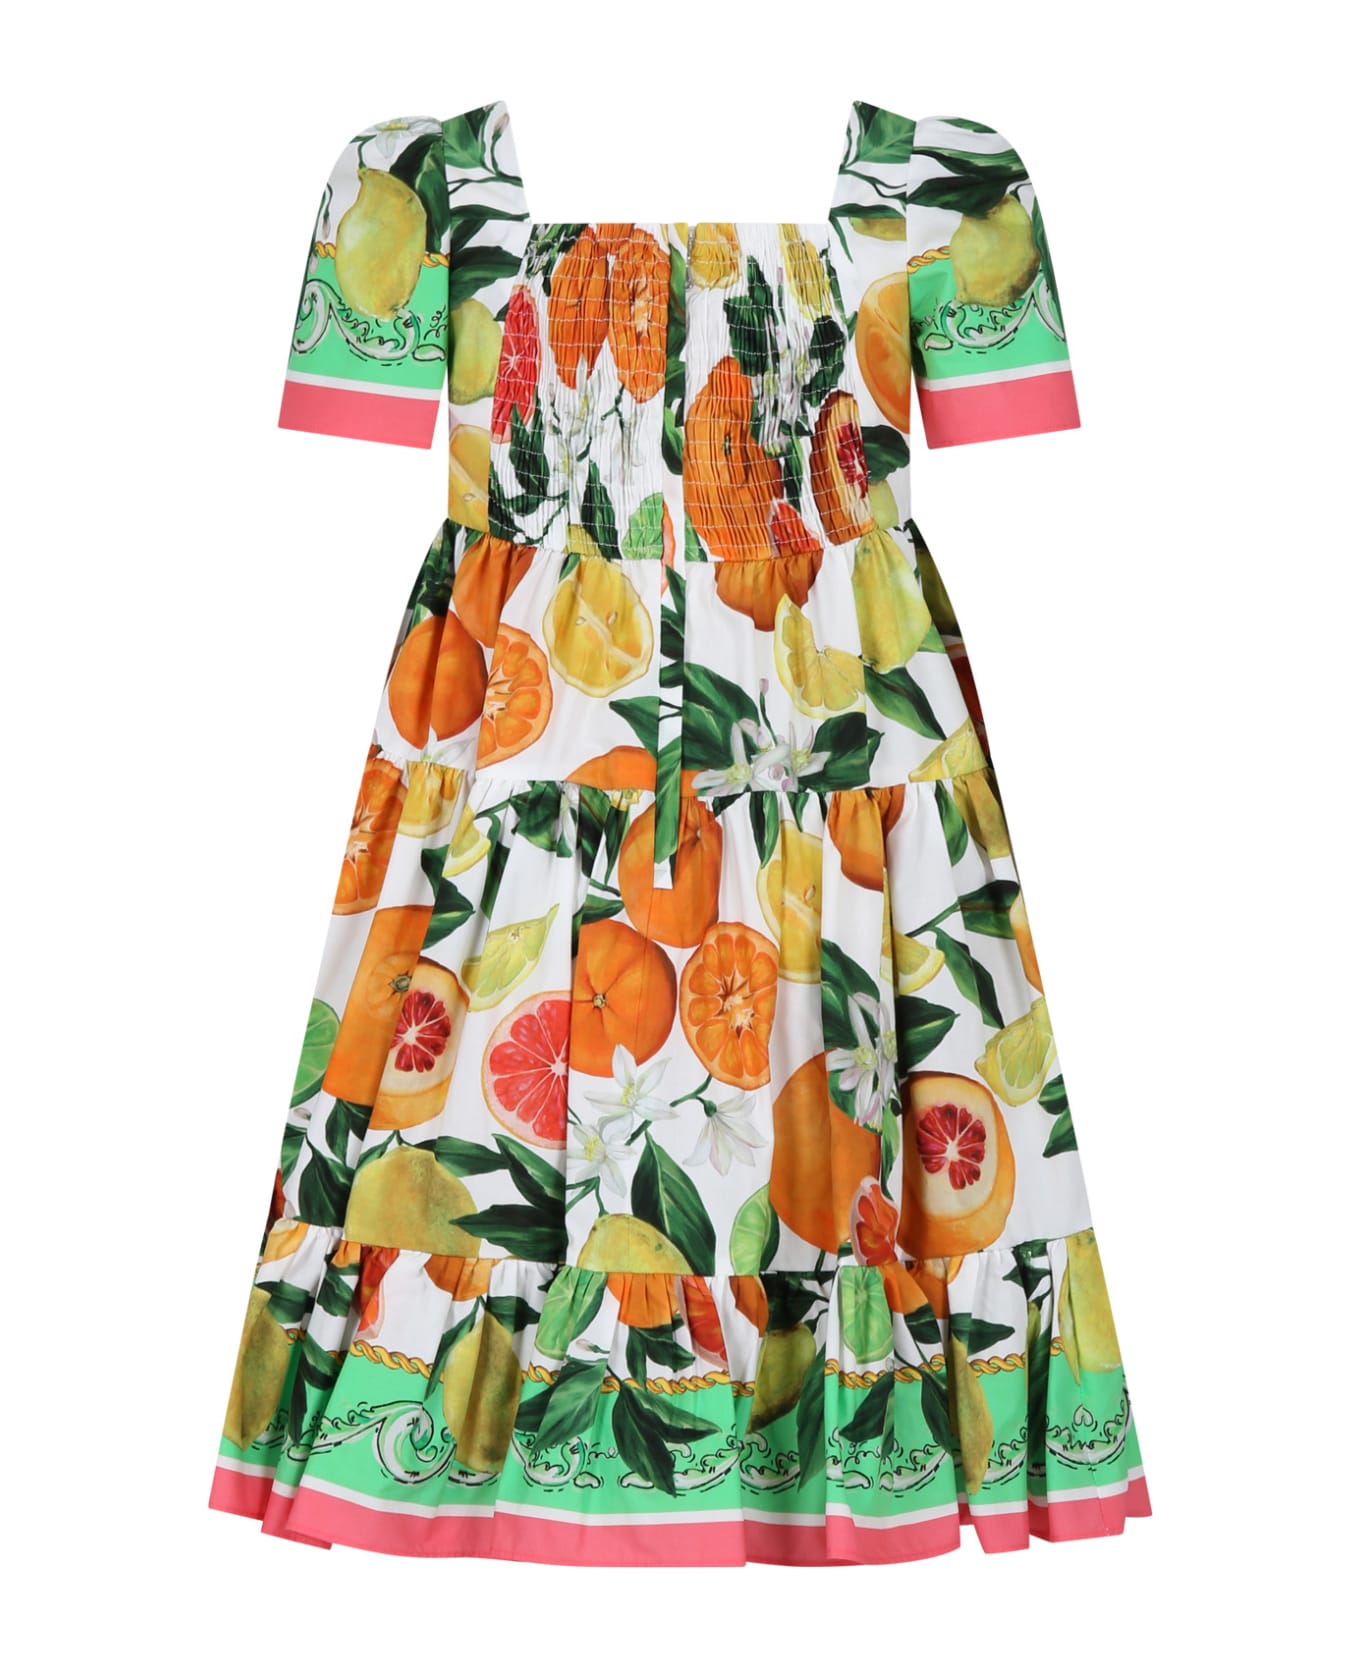 Dolce & Gabbana Multicolor Elegant Dress For Girl With An Italian Holiday Print - Multicolor